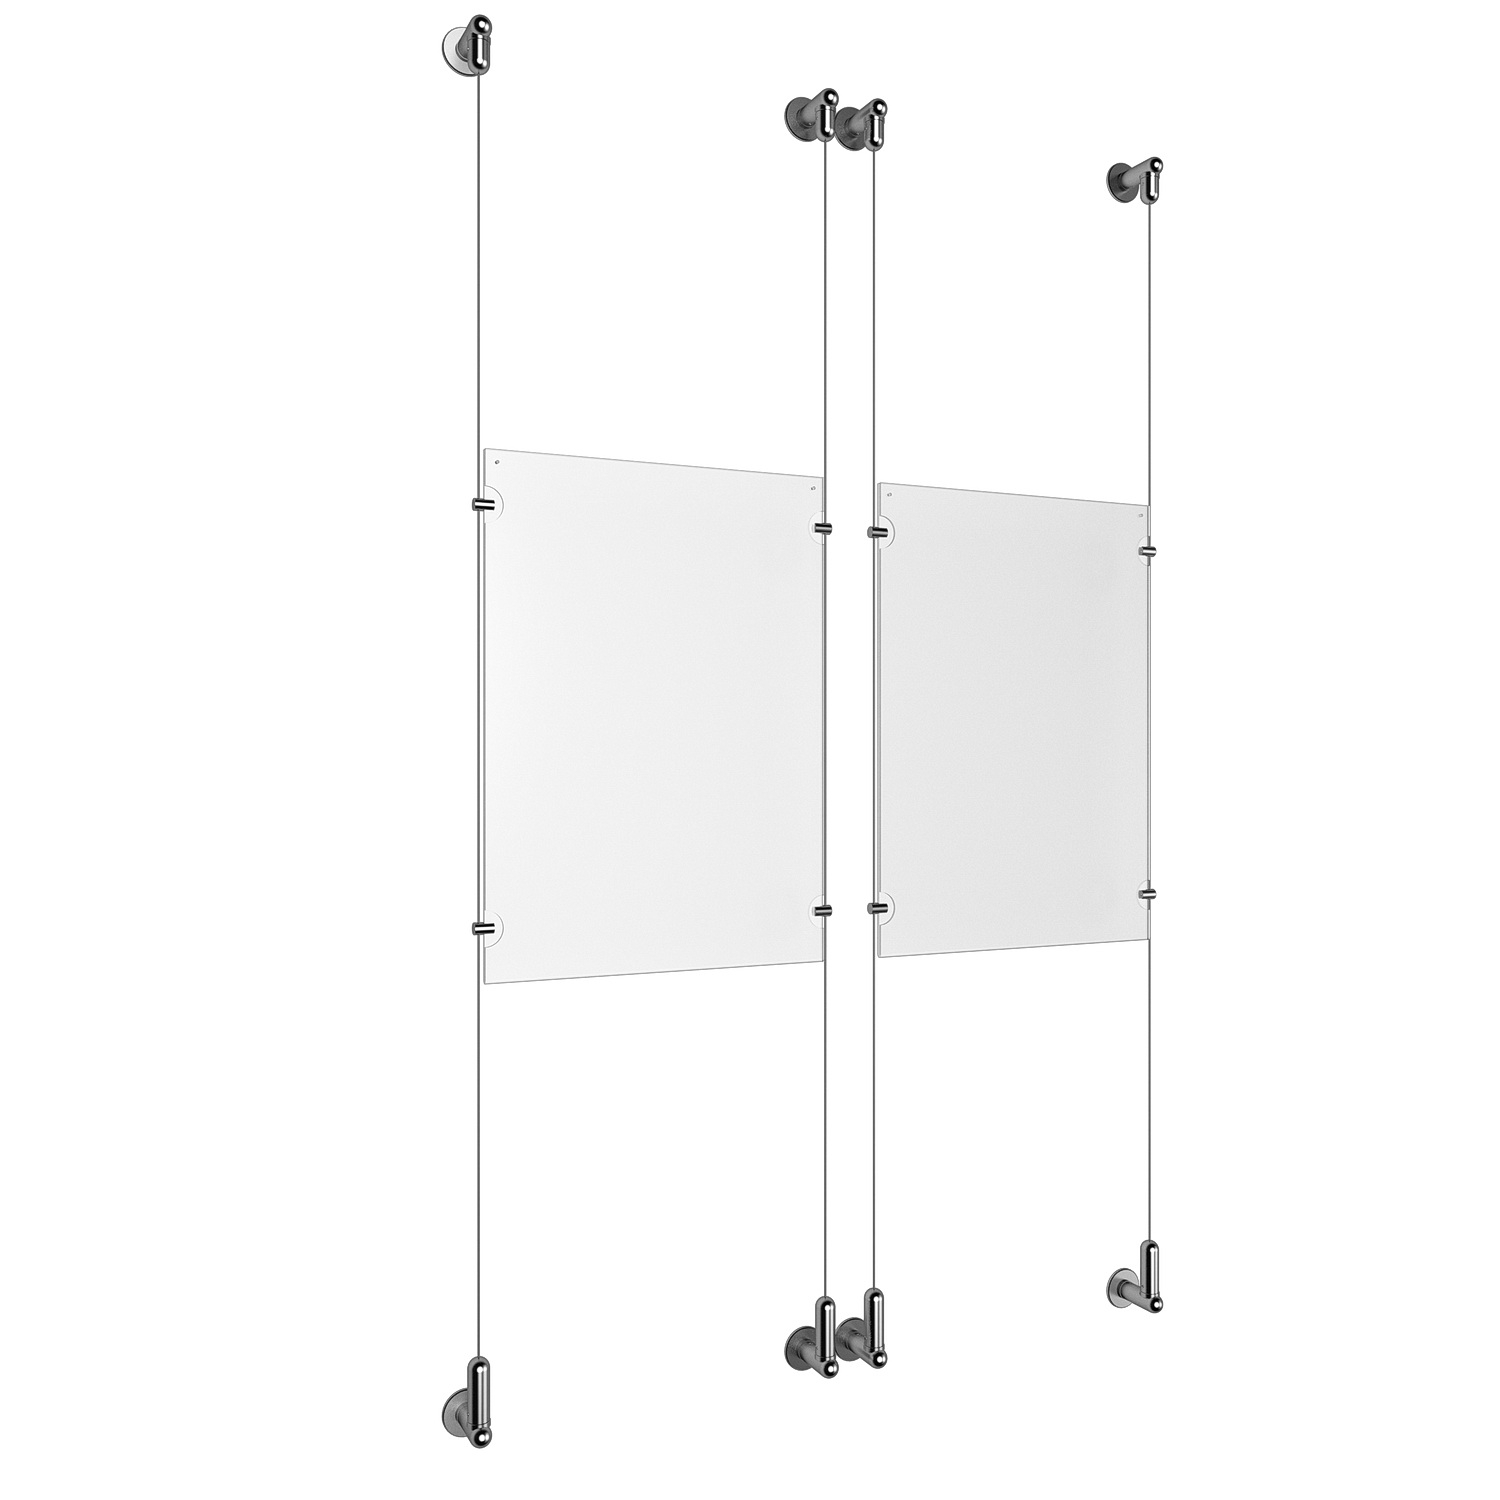 (2) 11'' Width x 17'' Height Clear Acrylic Frame & (4) Wall-to-Wall Aluminum Clear Anodized Cable Systems with (8) Single-Sided Panel Grippers